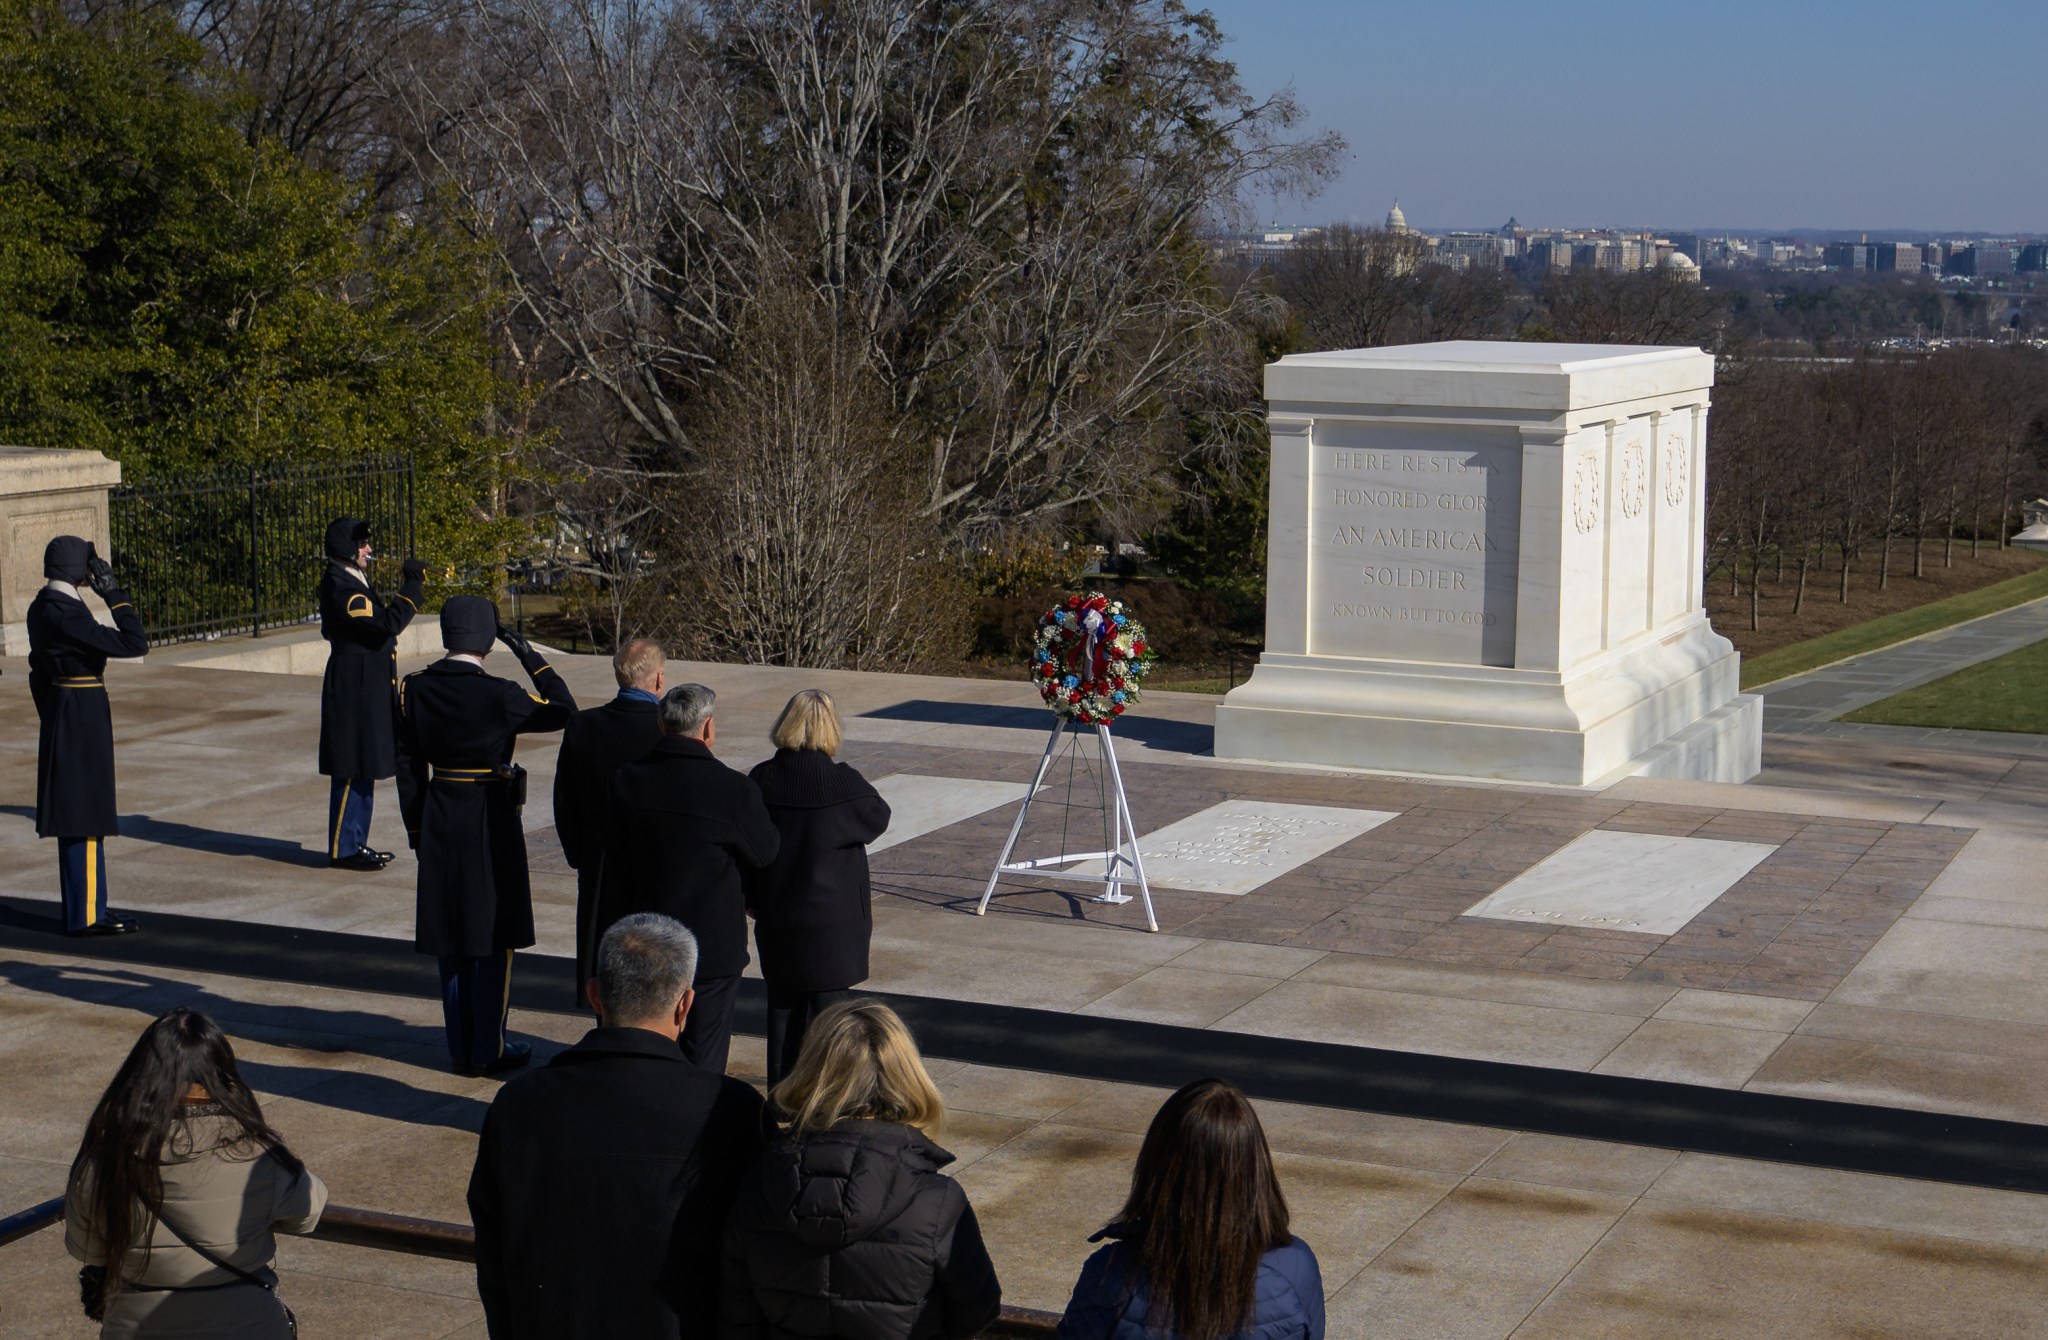 NASA Administrator Bill Nelson, NASA Deputy Administrator Pam Melroy, and NASA Associate Administrator Bob Cabana are seen after a wreath is laid at the Tomb of the Unknowns